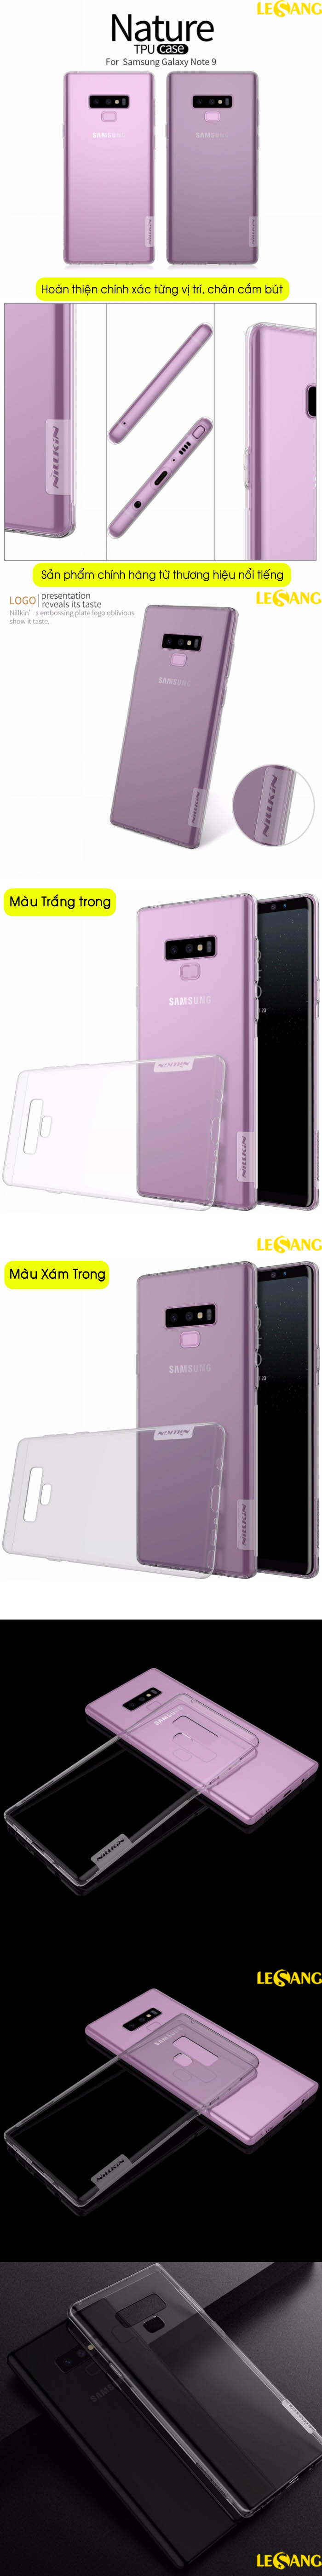 Ốp lưng Note 9 Nillkin TPU Case Silicon trong suốt mỏng 4